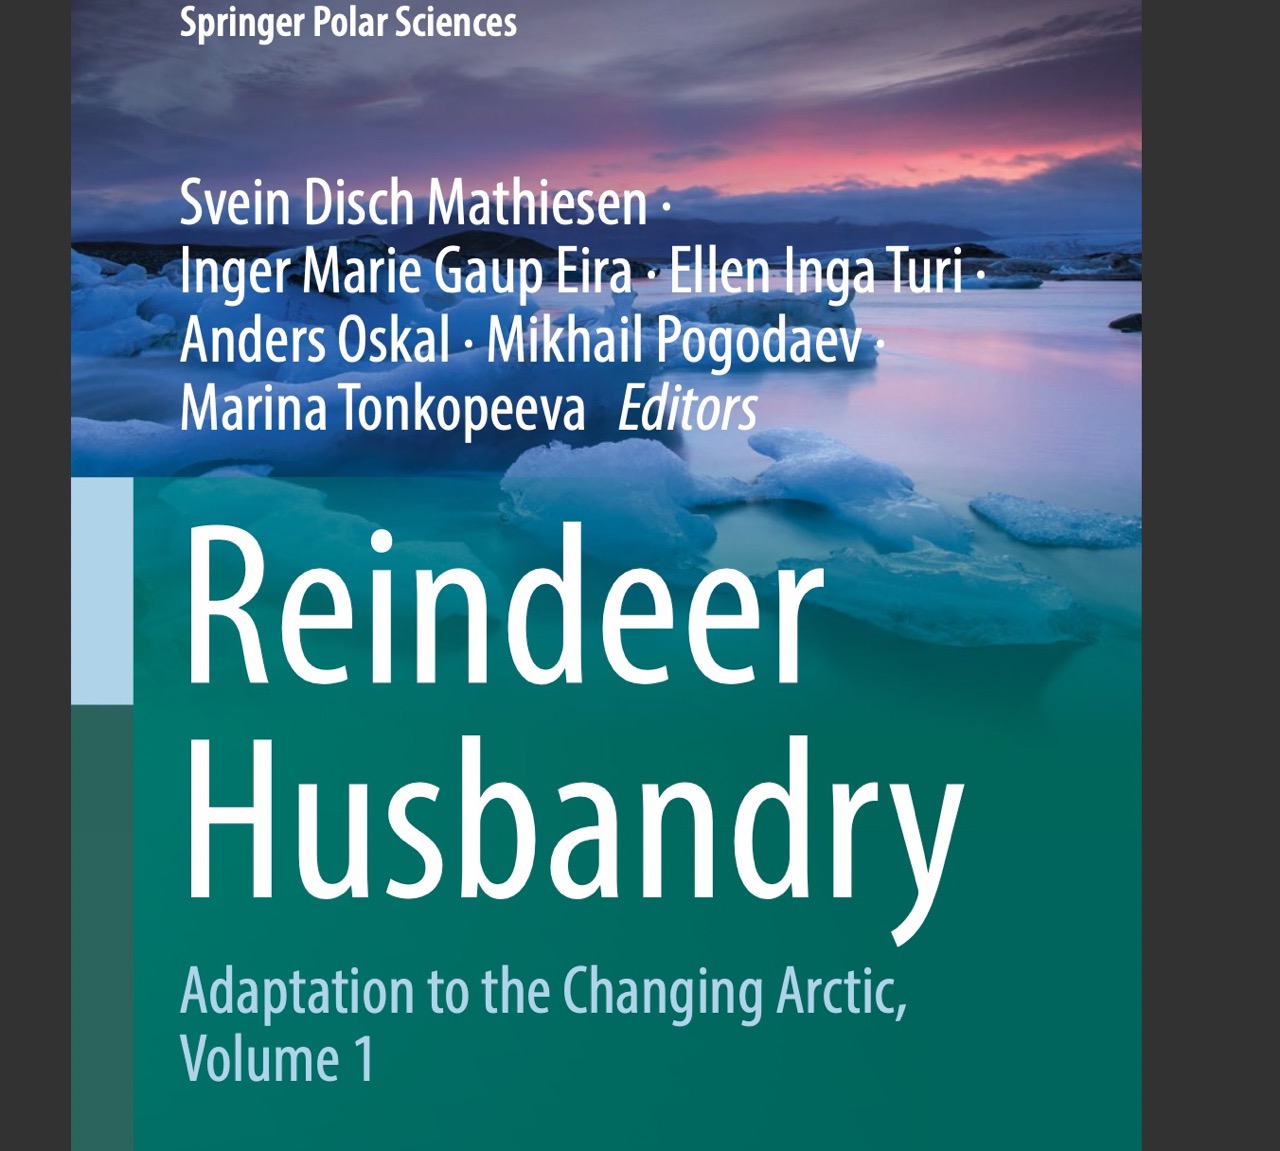 Book about Reindeer Husbandry is the Gourmand Awards winner